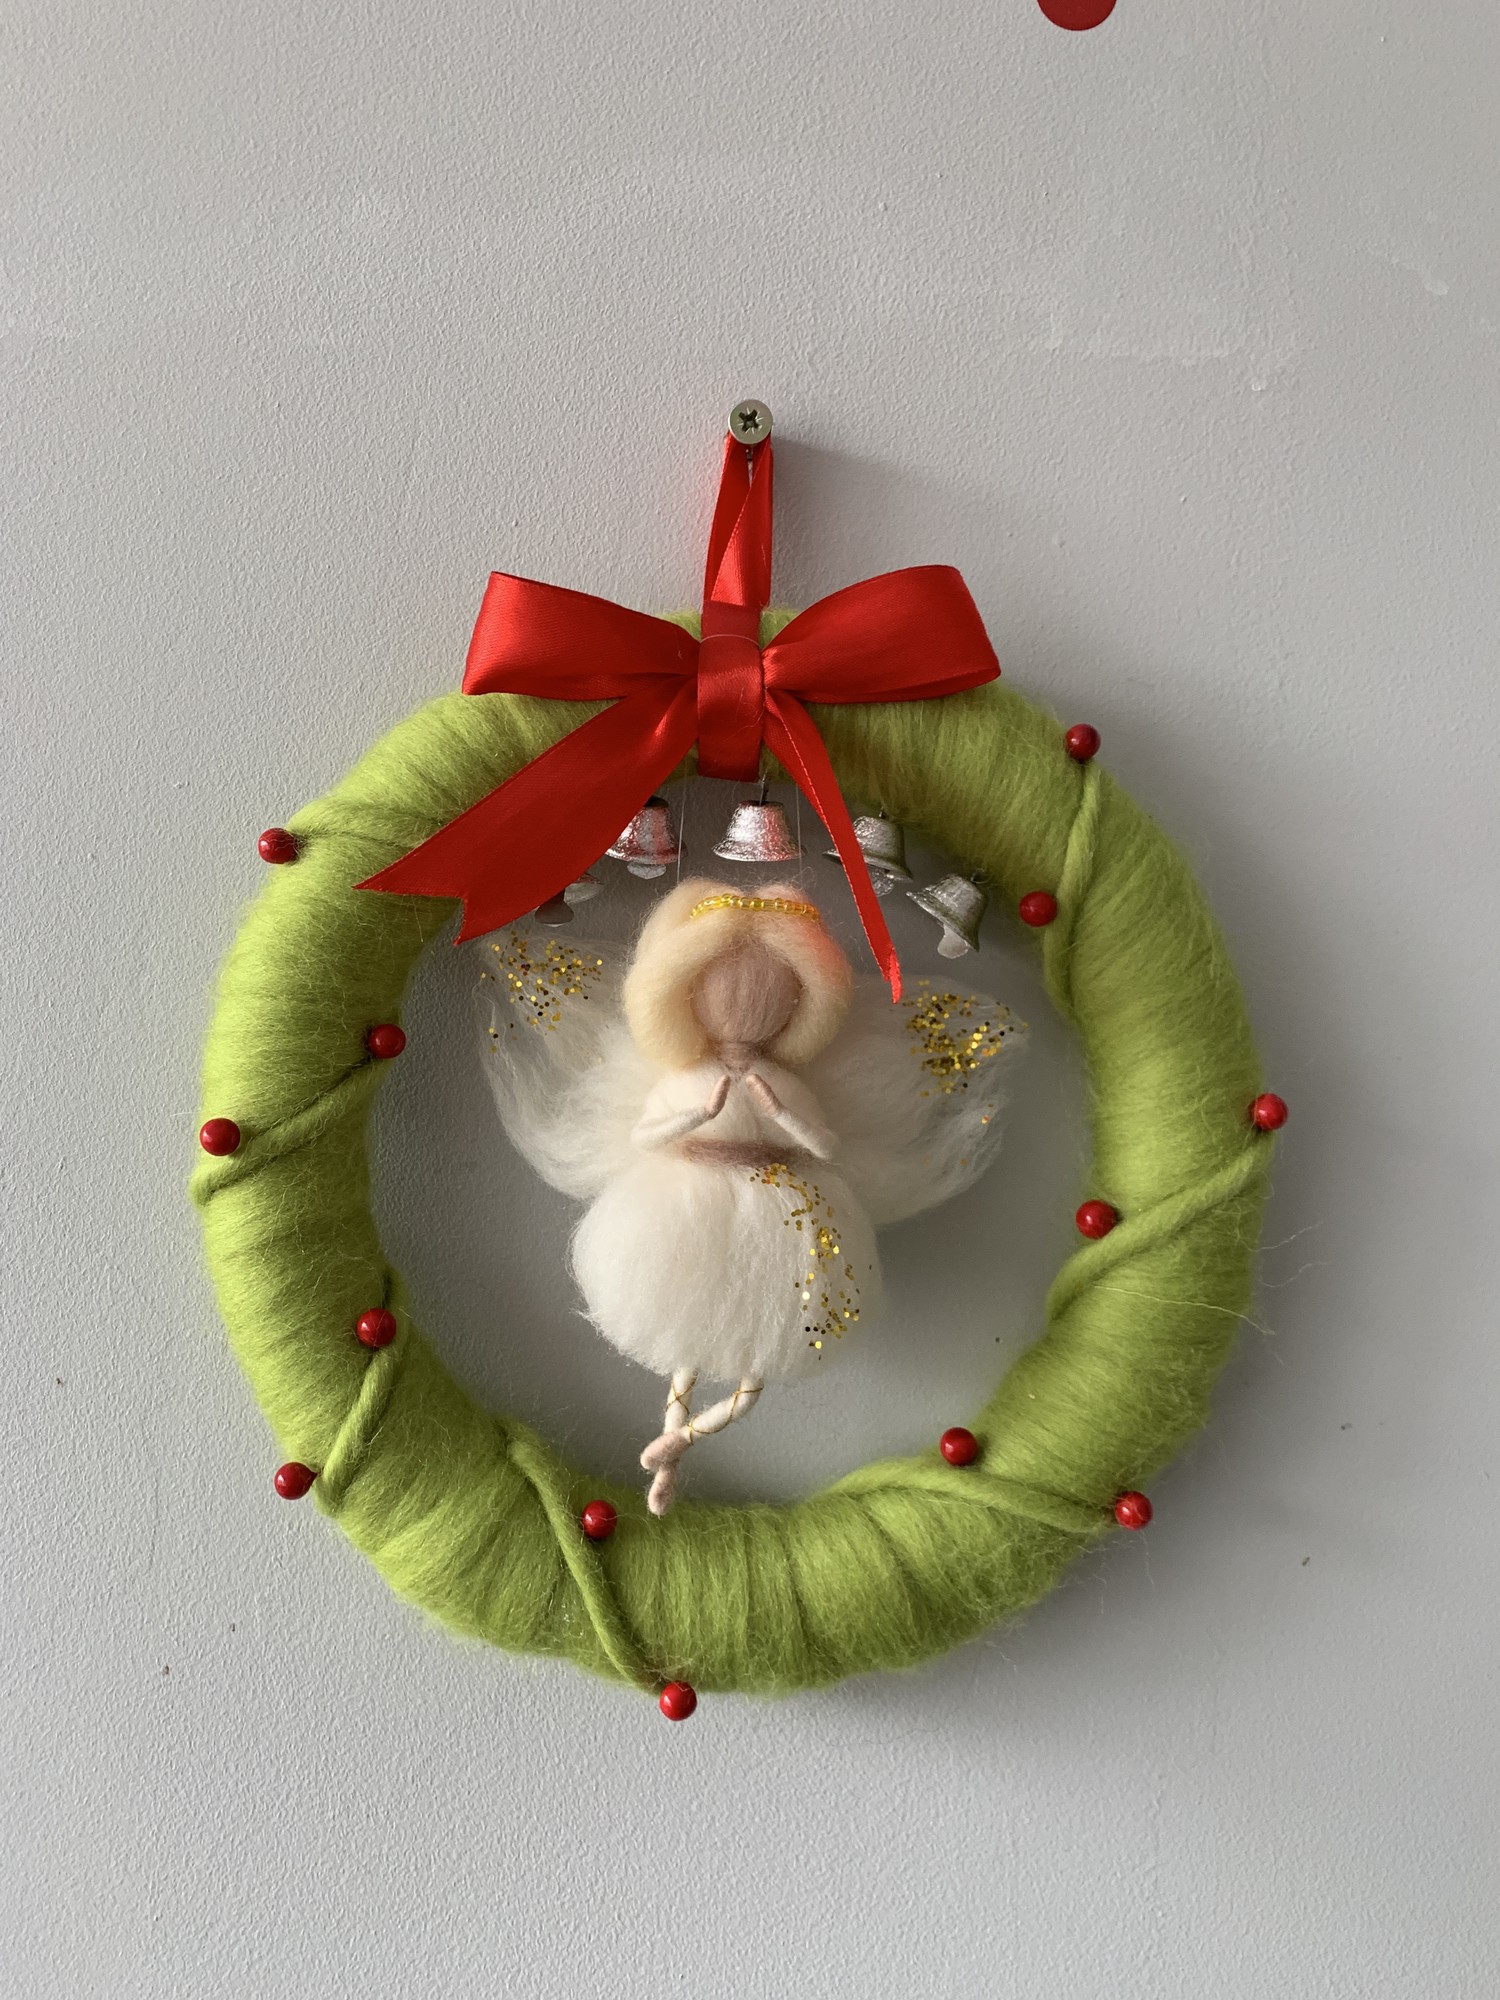 Wreath on the door, decoration for the New Year and Christmas, decor with an angel, New Year's and Christmas decor